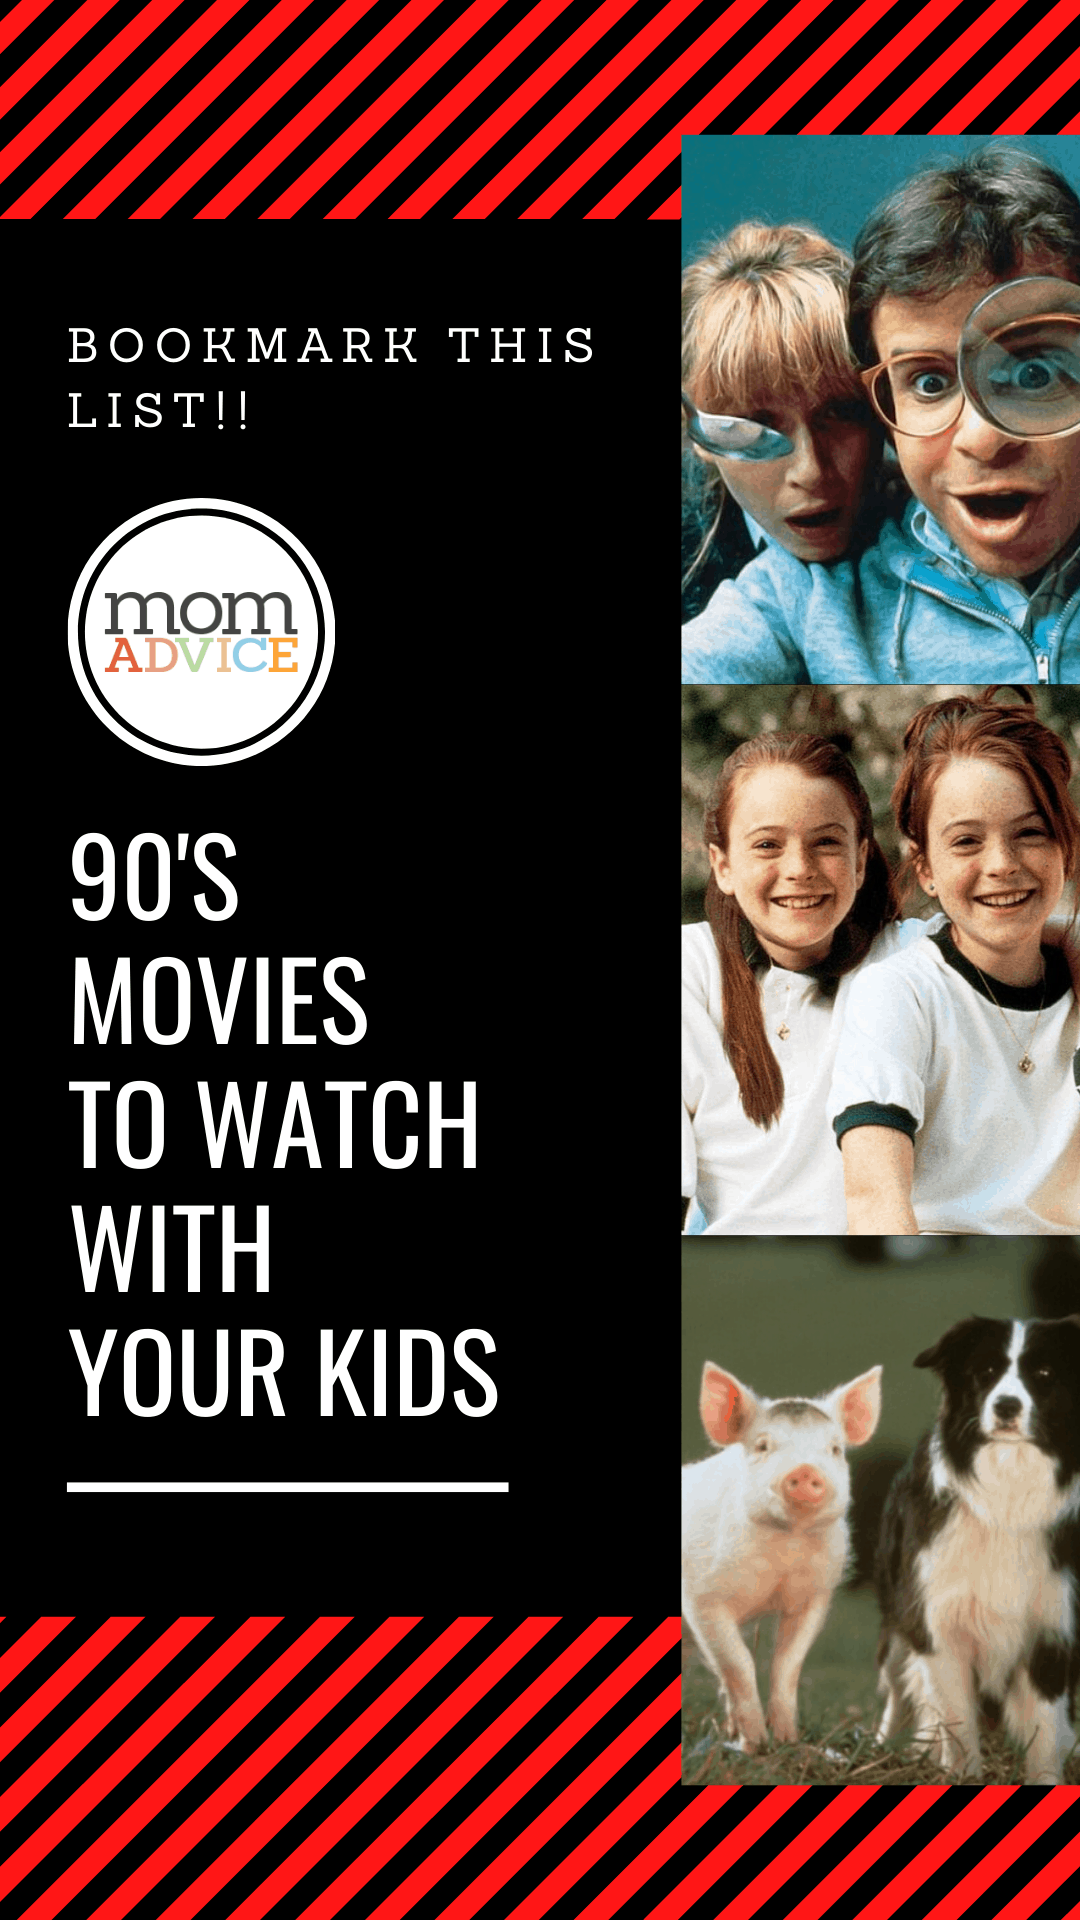 17 Movies From the 90’s You Must Share With Your Kids